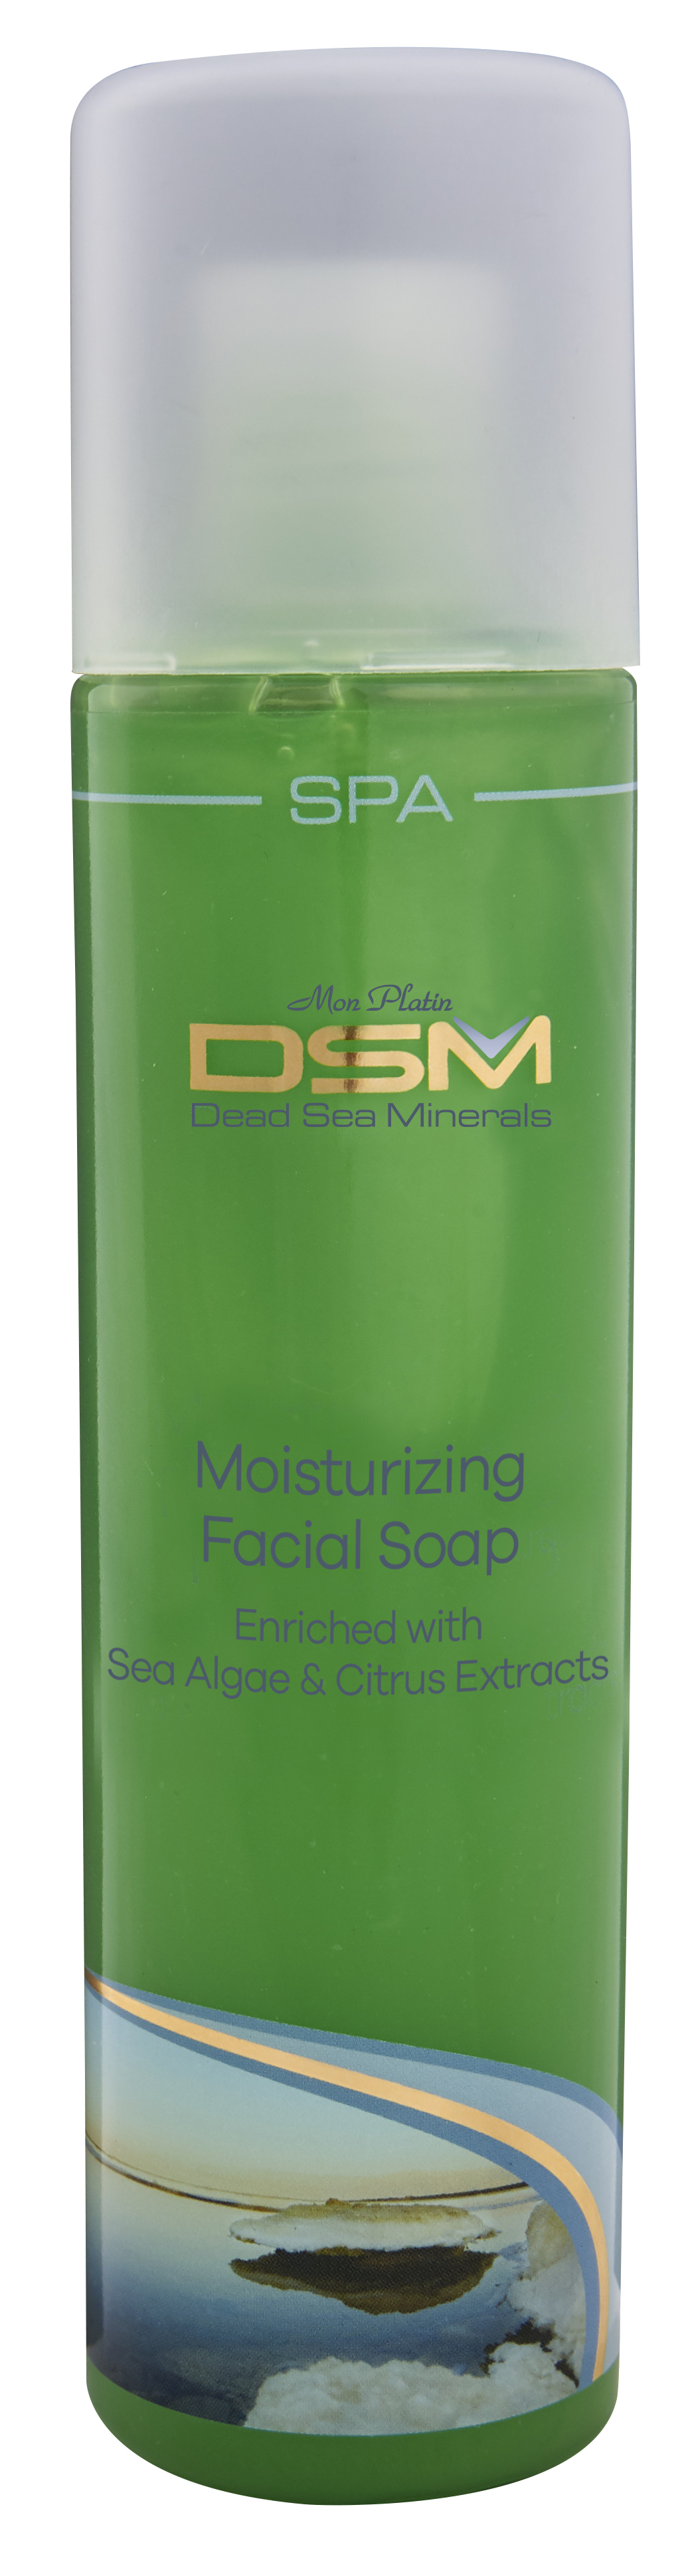 Moisturizing Face Soap enriched with Algae and Citrus